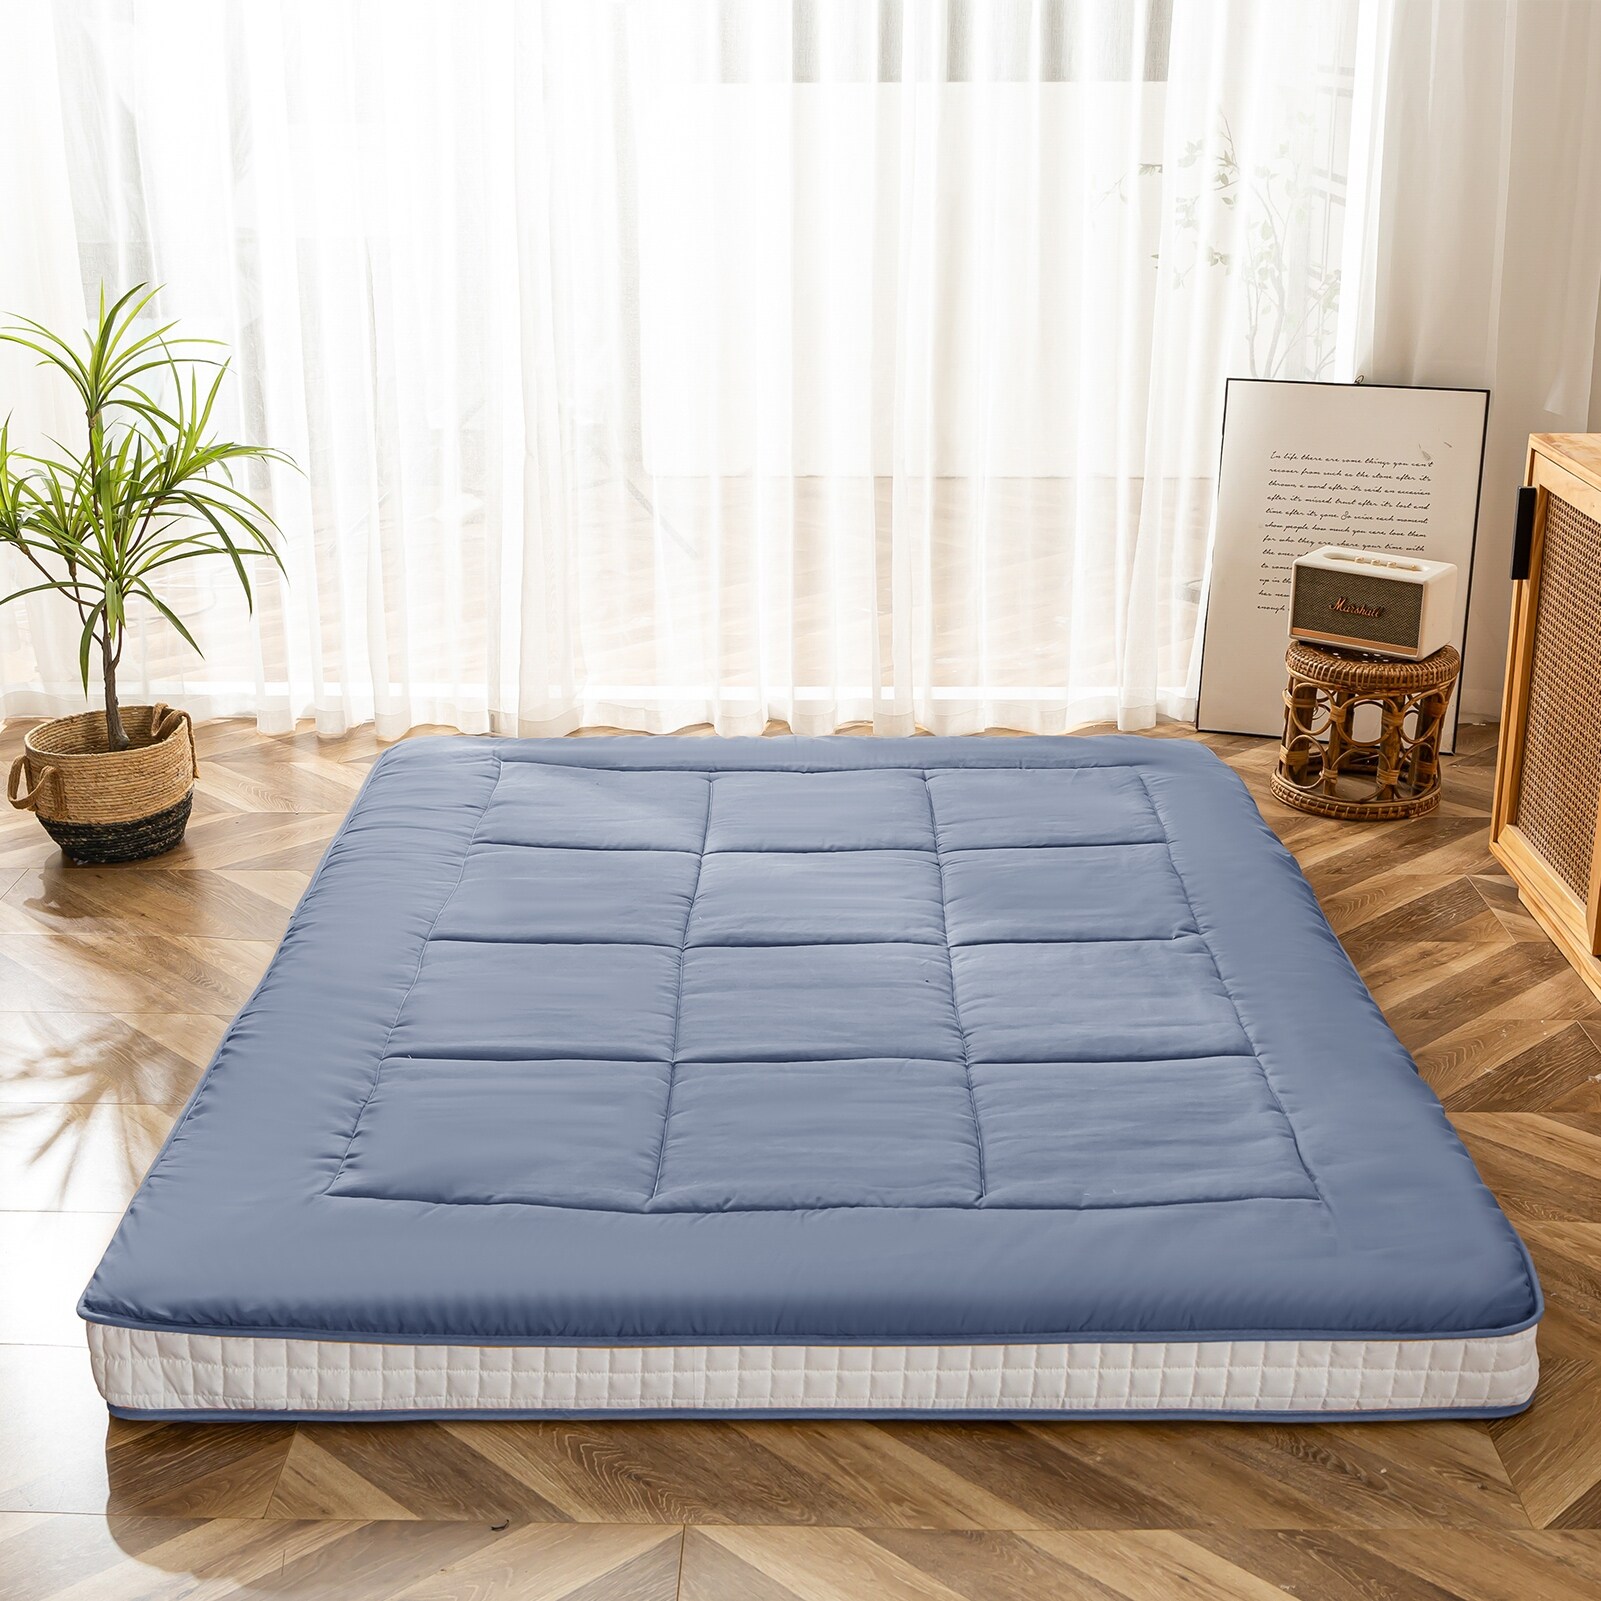 https://ak1.ostkcdn.com/images/products/is/images/direct/d8e868121f8dcaa139415820bff4b74e3390eb10/Padded-Japanese-Roll-Up-Floor-Futon-Mattress.jpg